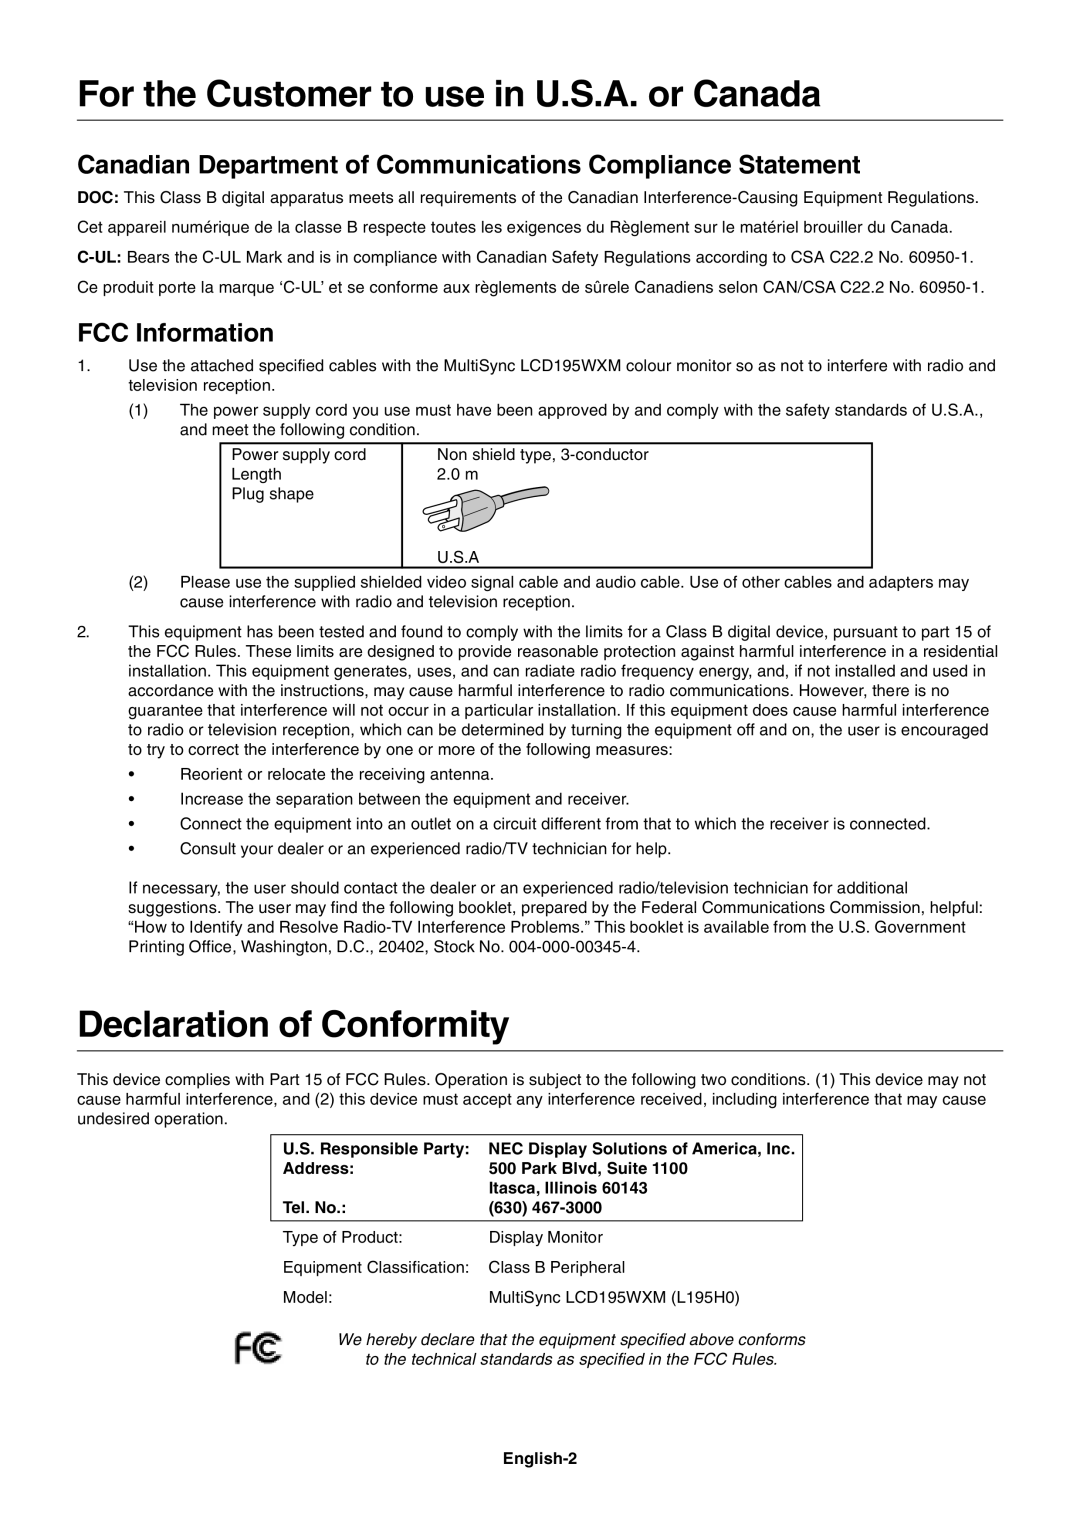 NEC LCD1970NX user manual For the Customer to use in U.S.A. or Canada, Declaration of Conformity, FCC Information 